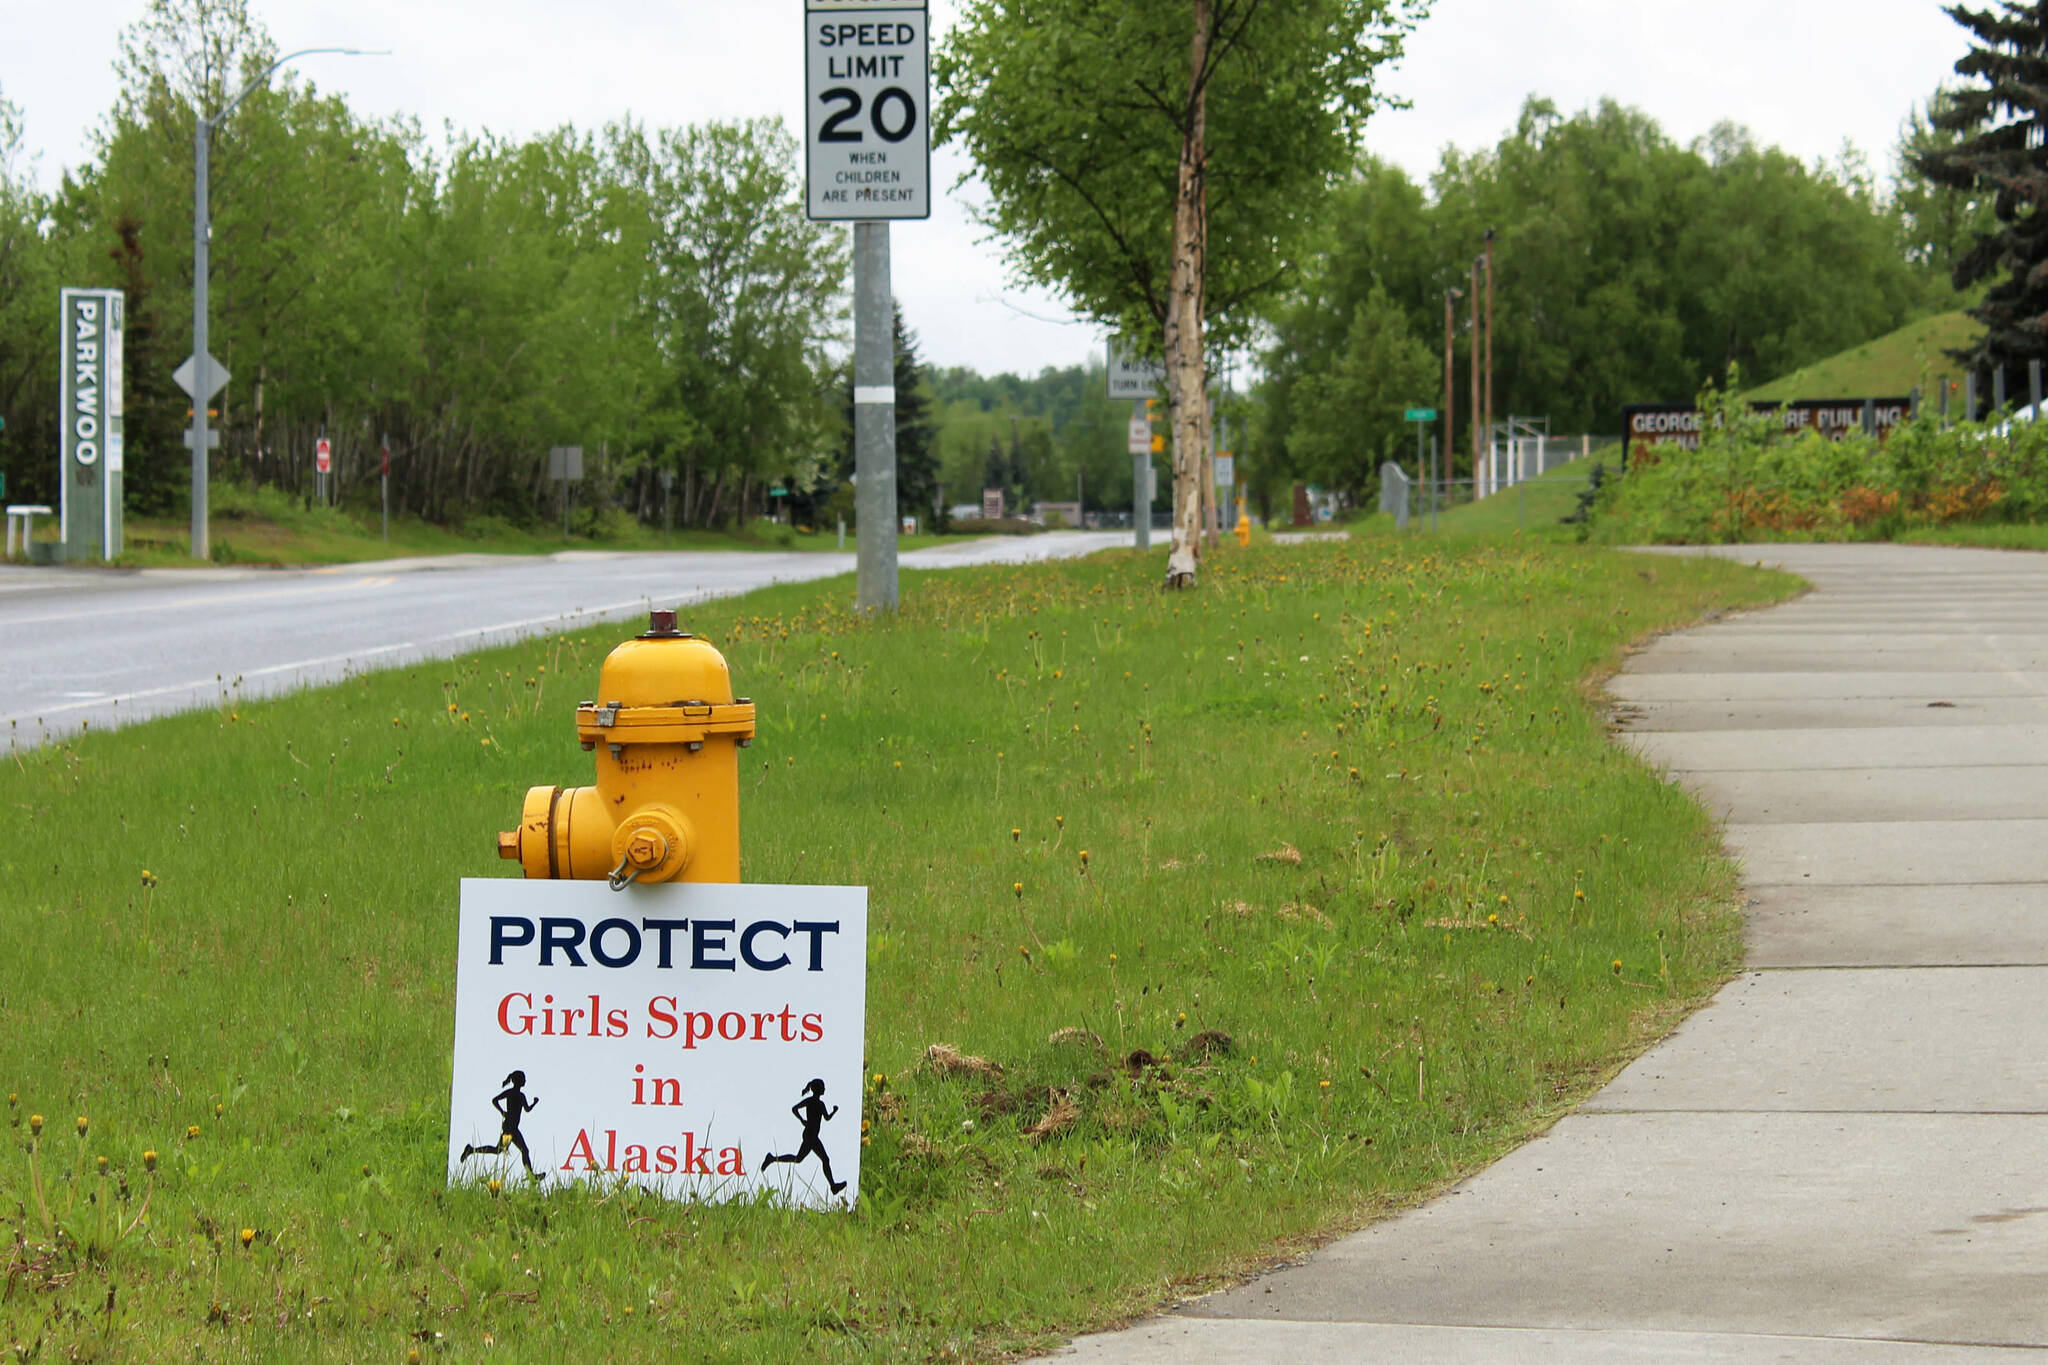 A sign opposing the participation of trans girls in girls sports is propped against a fire hydrant outside of the George A. Navarre Admin Building on Thursday, June 8, 2023 in Soldotna, Alaska. The Alaska Board of Education met in the building to discuss a resolution that would ban trans girls from girls high school sports. (Ashlyn O’Hara/Peninsula Clarion)